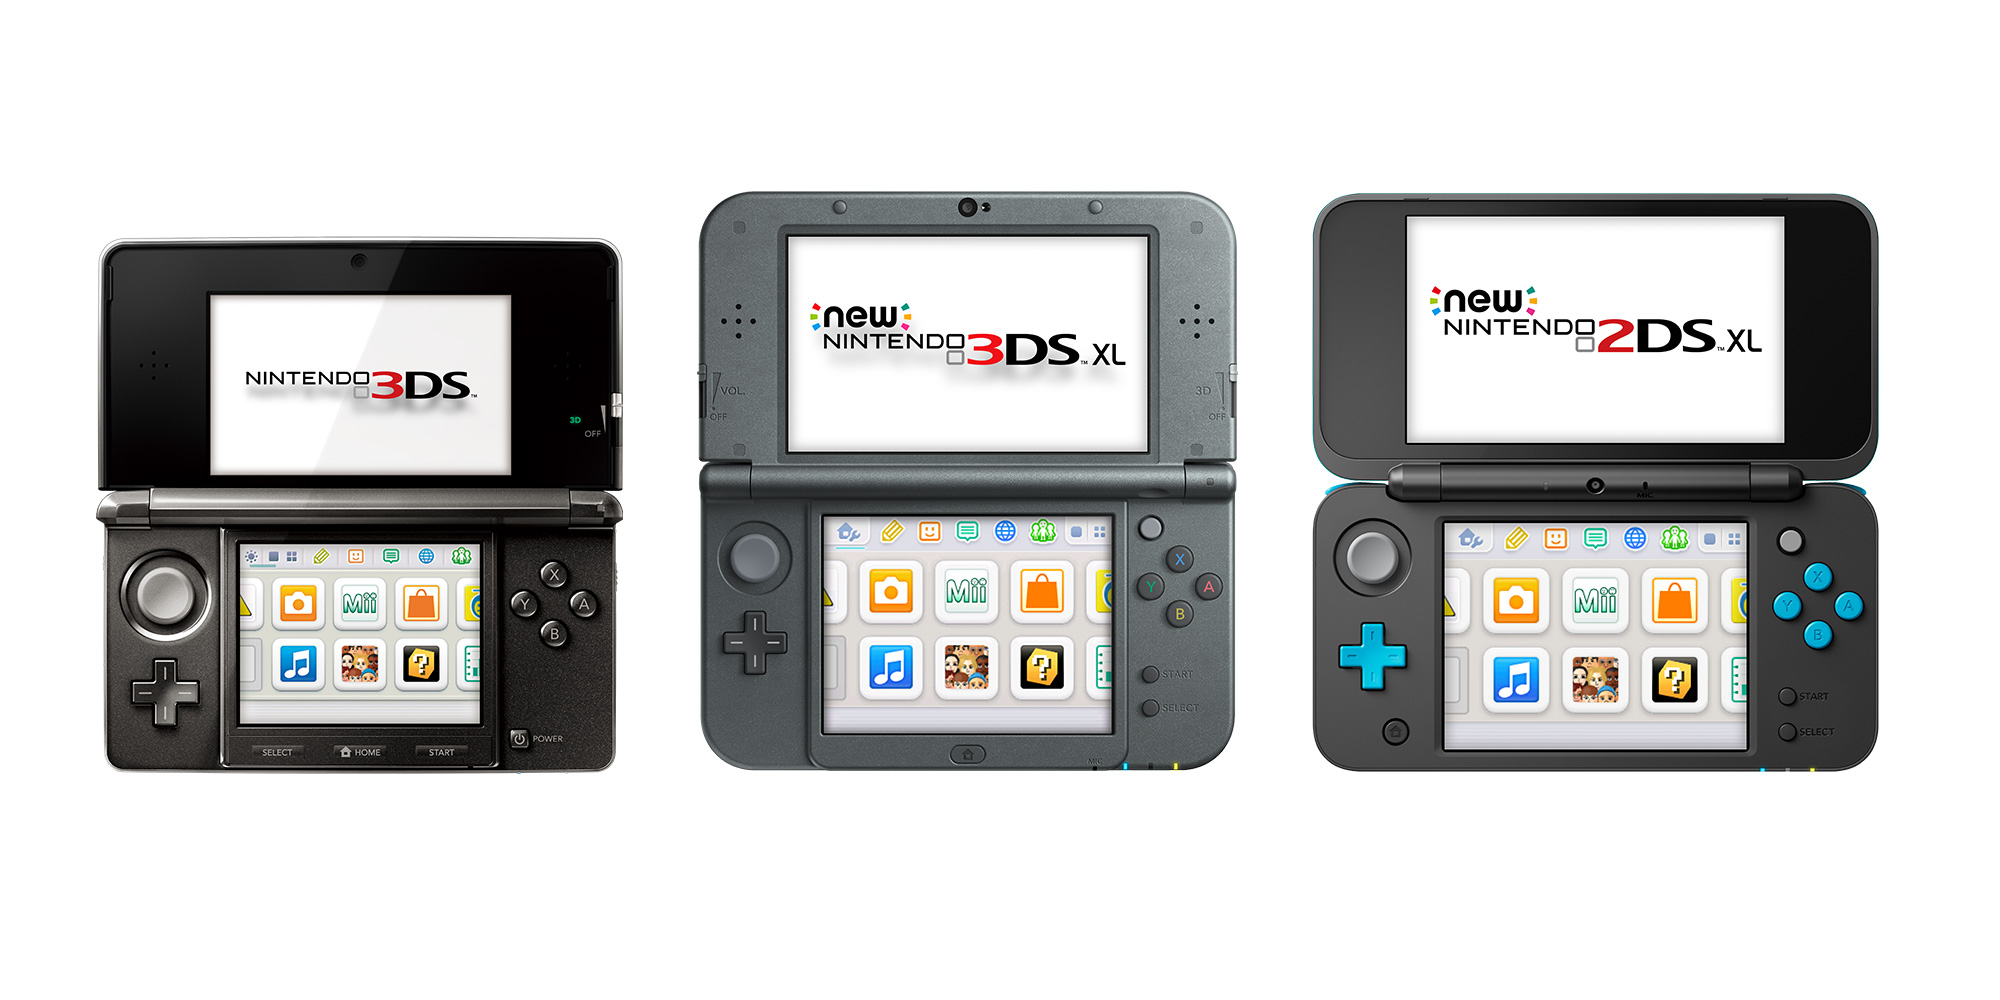 Can I play 3DS games on DS?